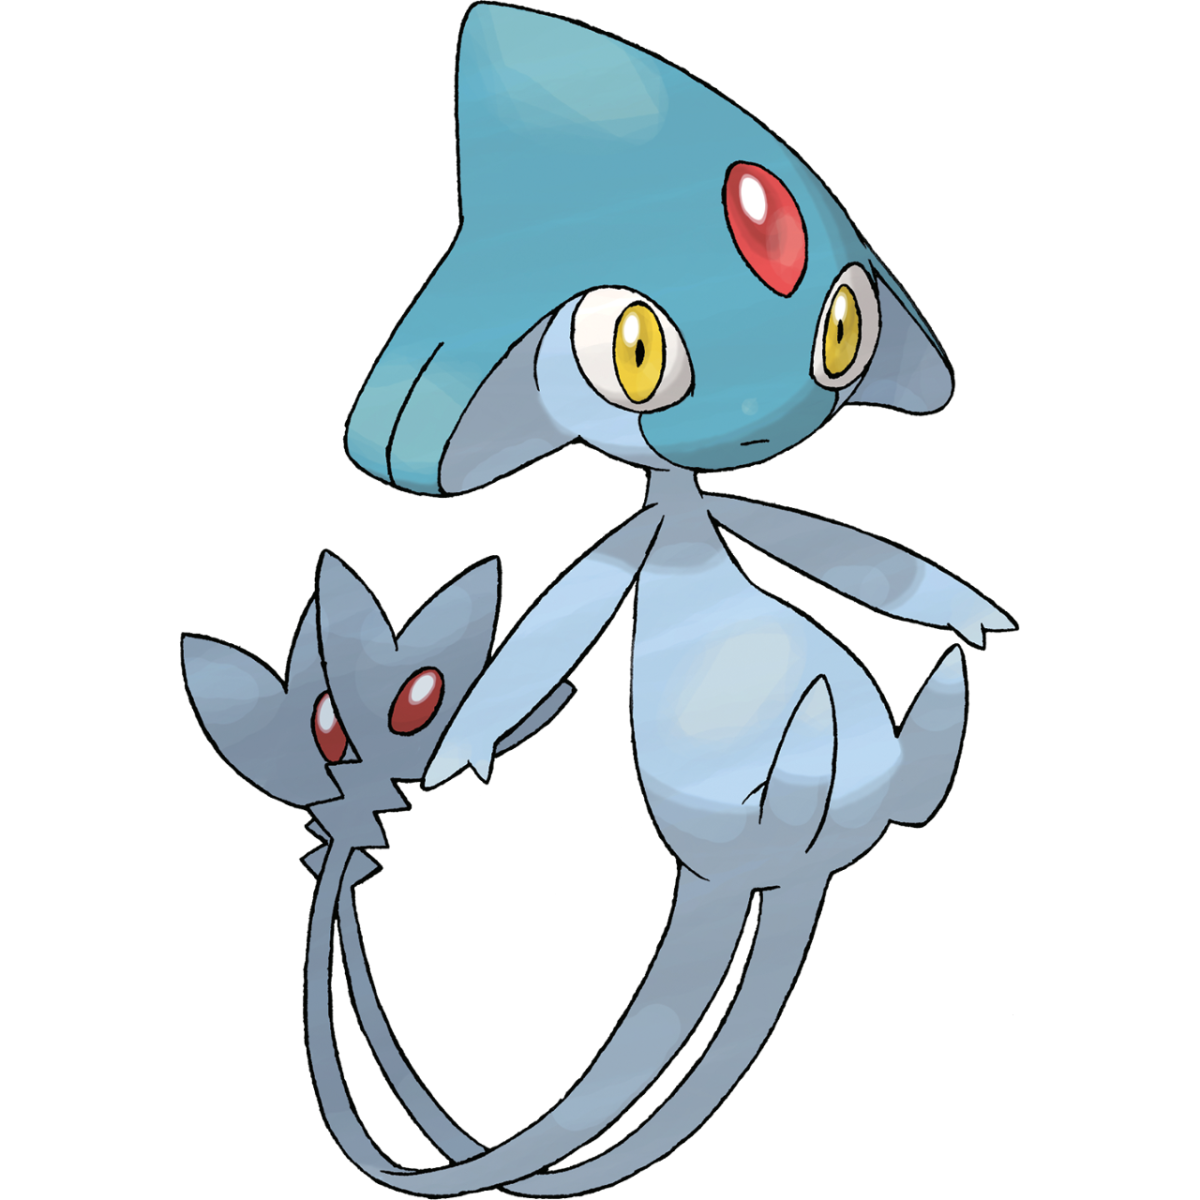 Azelf is the third original Pokemon with psychic abilities.